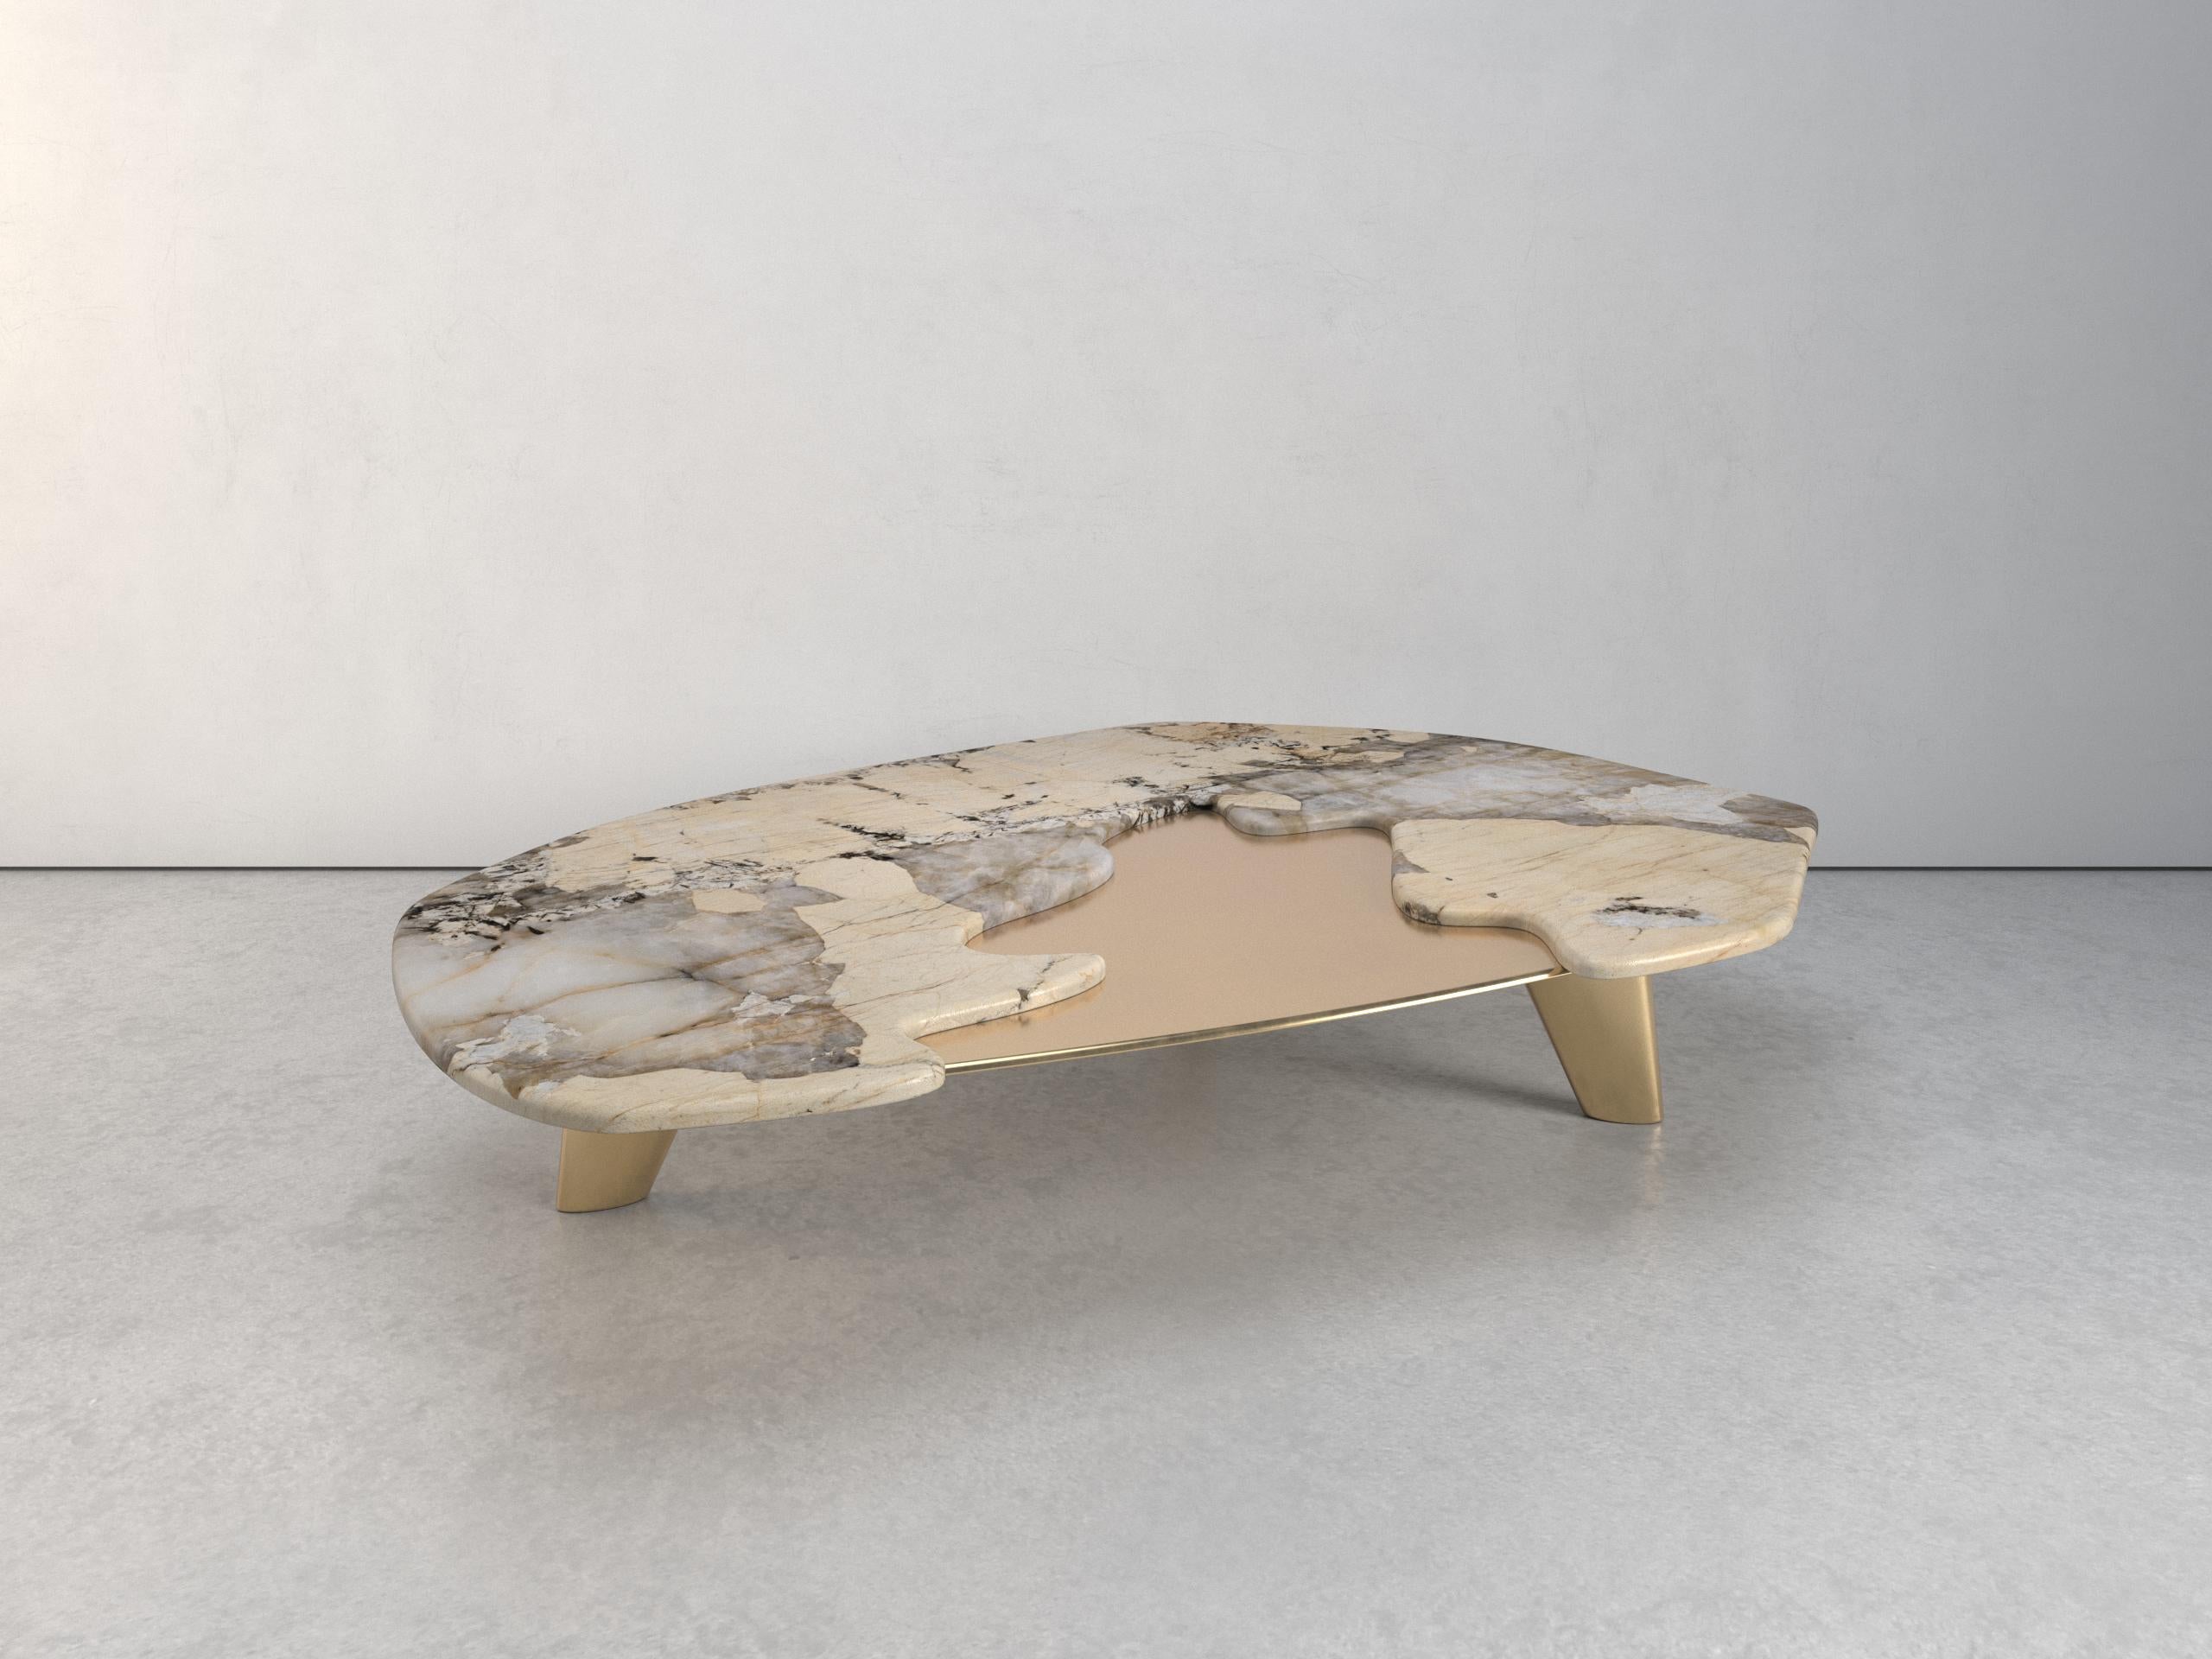 The elements IV coffee table, 1 of 1 by Grzegorz Majka
Edition 1 of 1
Dimensions: 67 x 52 x 13 in.
Materials: solid brass. quartzite patagonia.


“The Elements IV” is one of a kind and one of the series of various coffee tables presented in